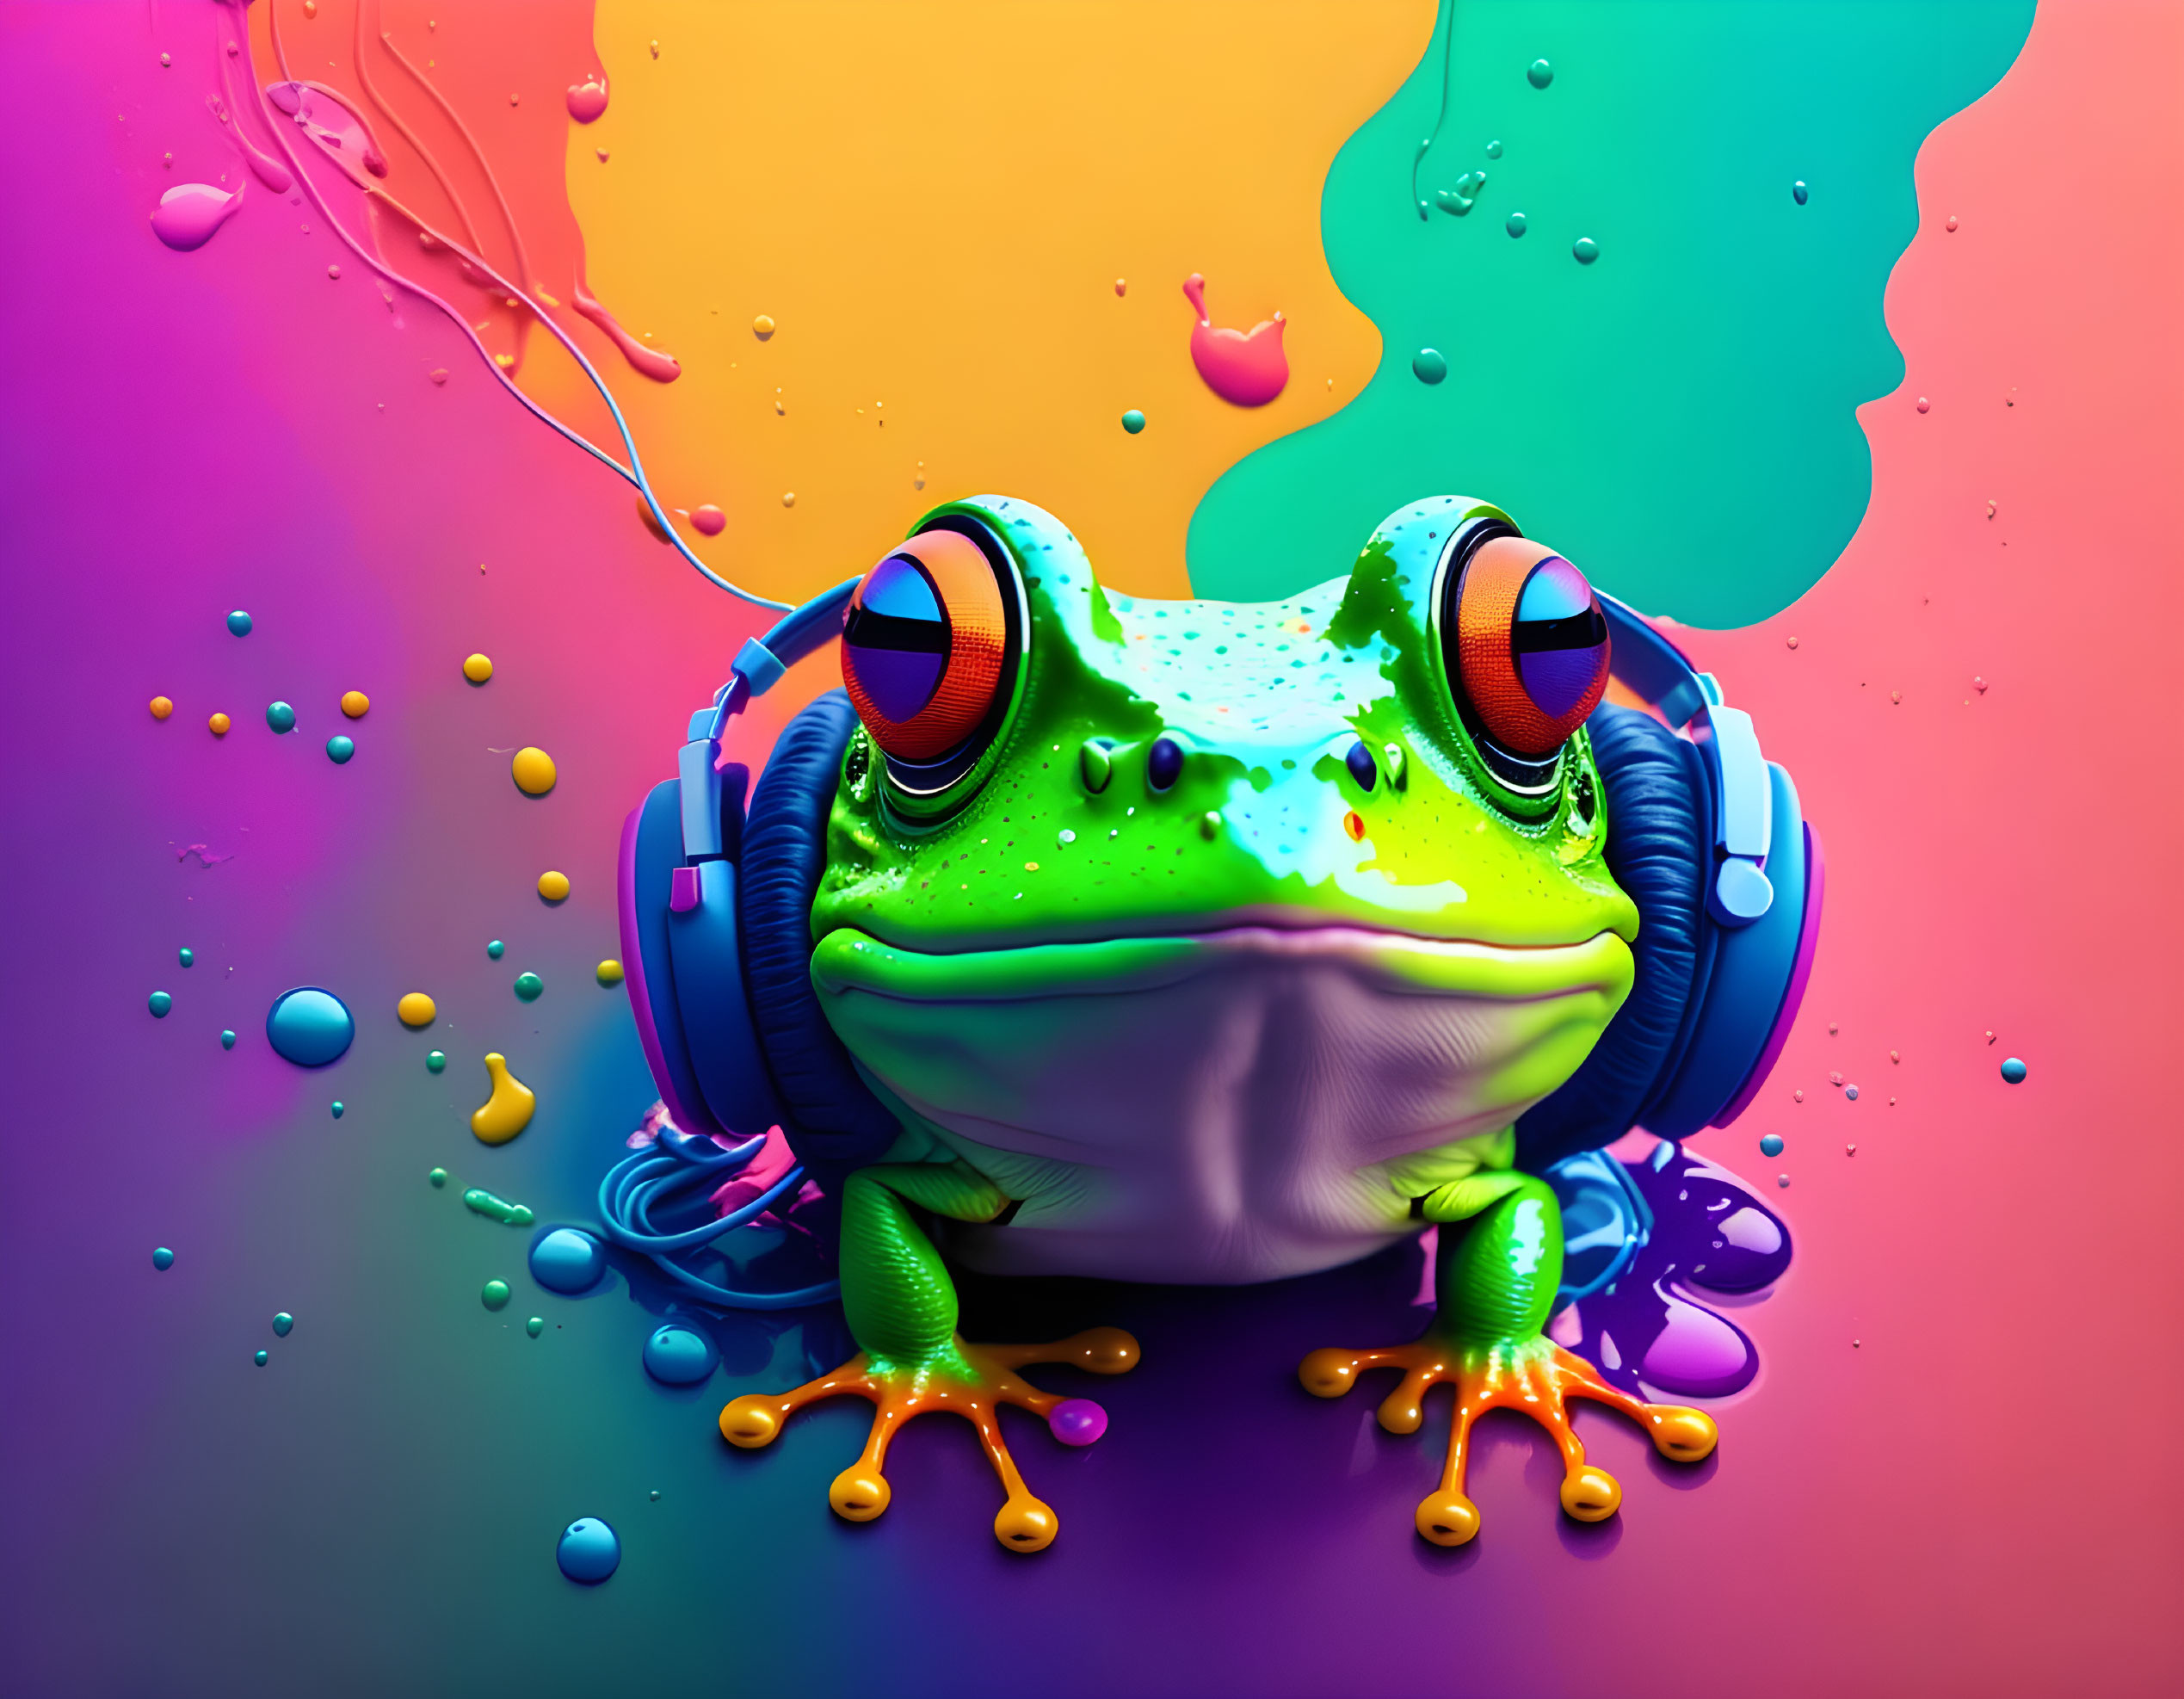 Colorful Frog Illustration with Headphones and Liquid Splashes